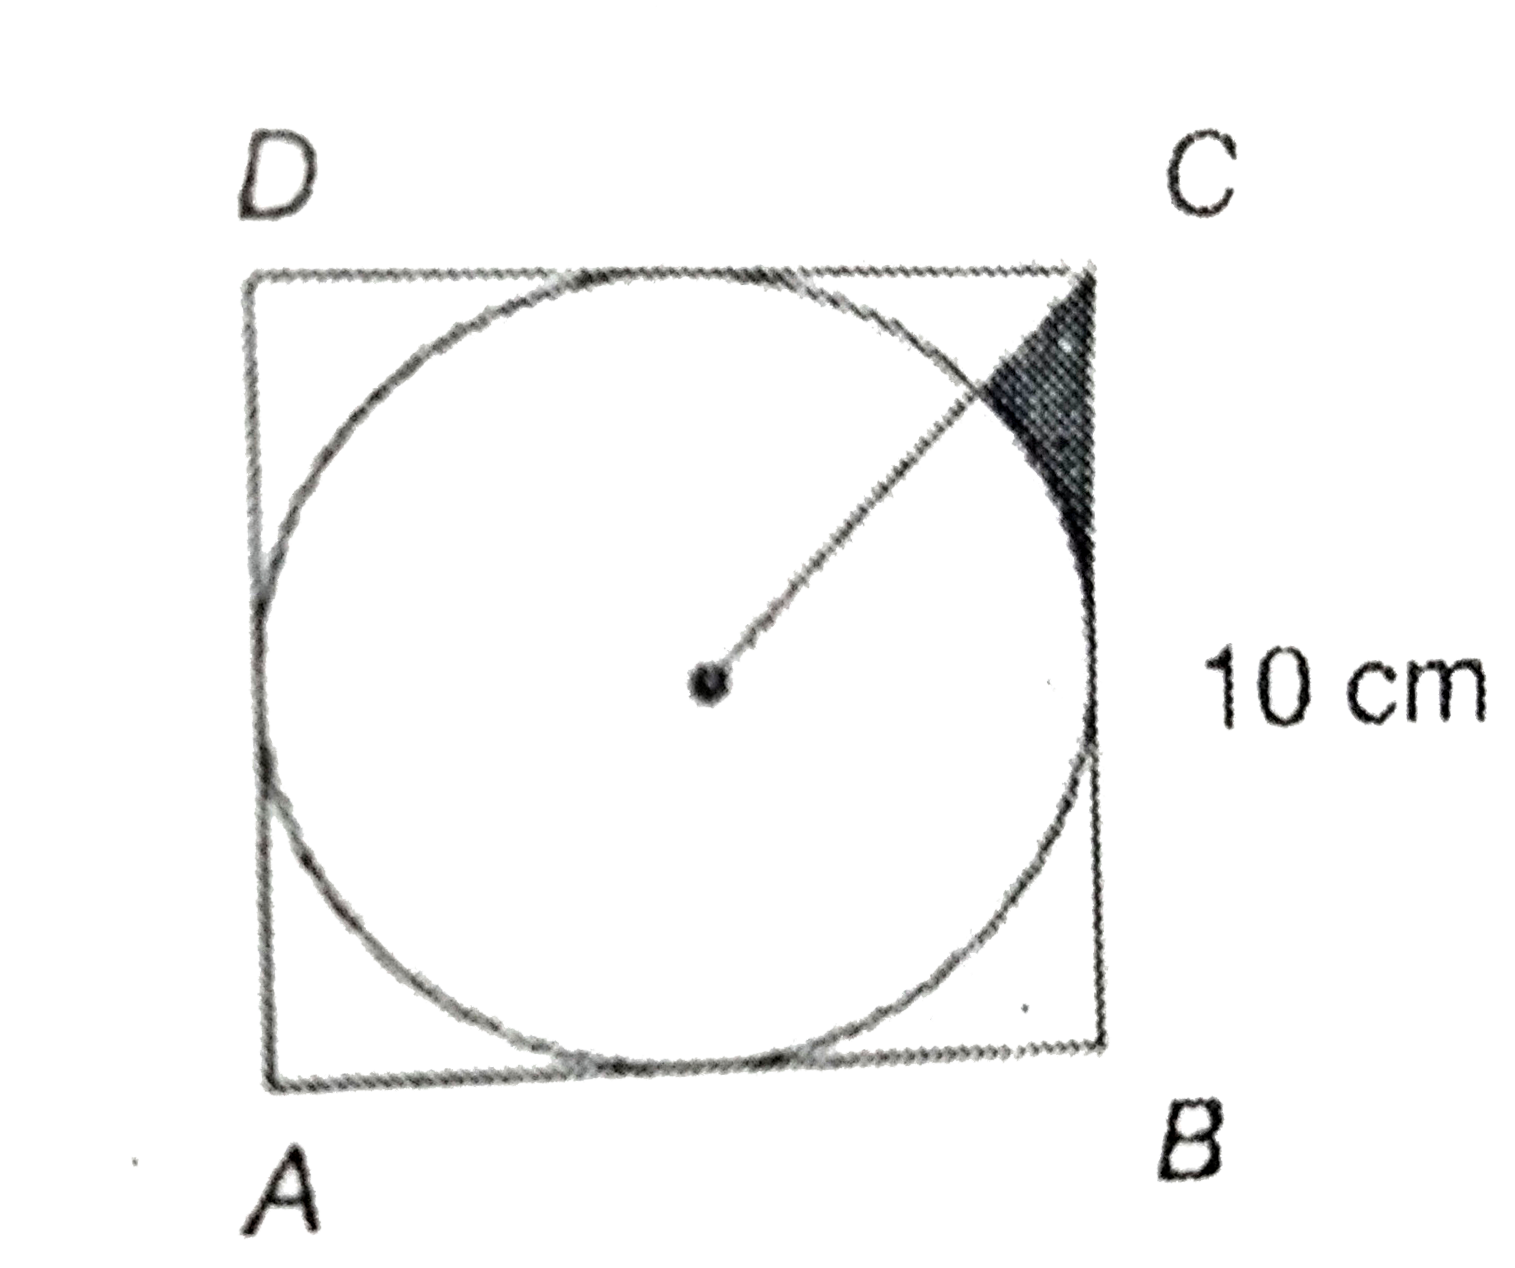 In the figure given below, ABCD is a square of side 10 cm and a circle is inscribed in it. Find the area of the shaded part as shown in the figure.